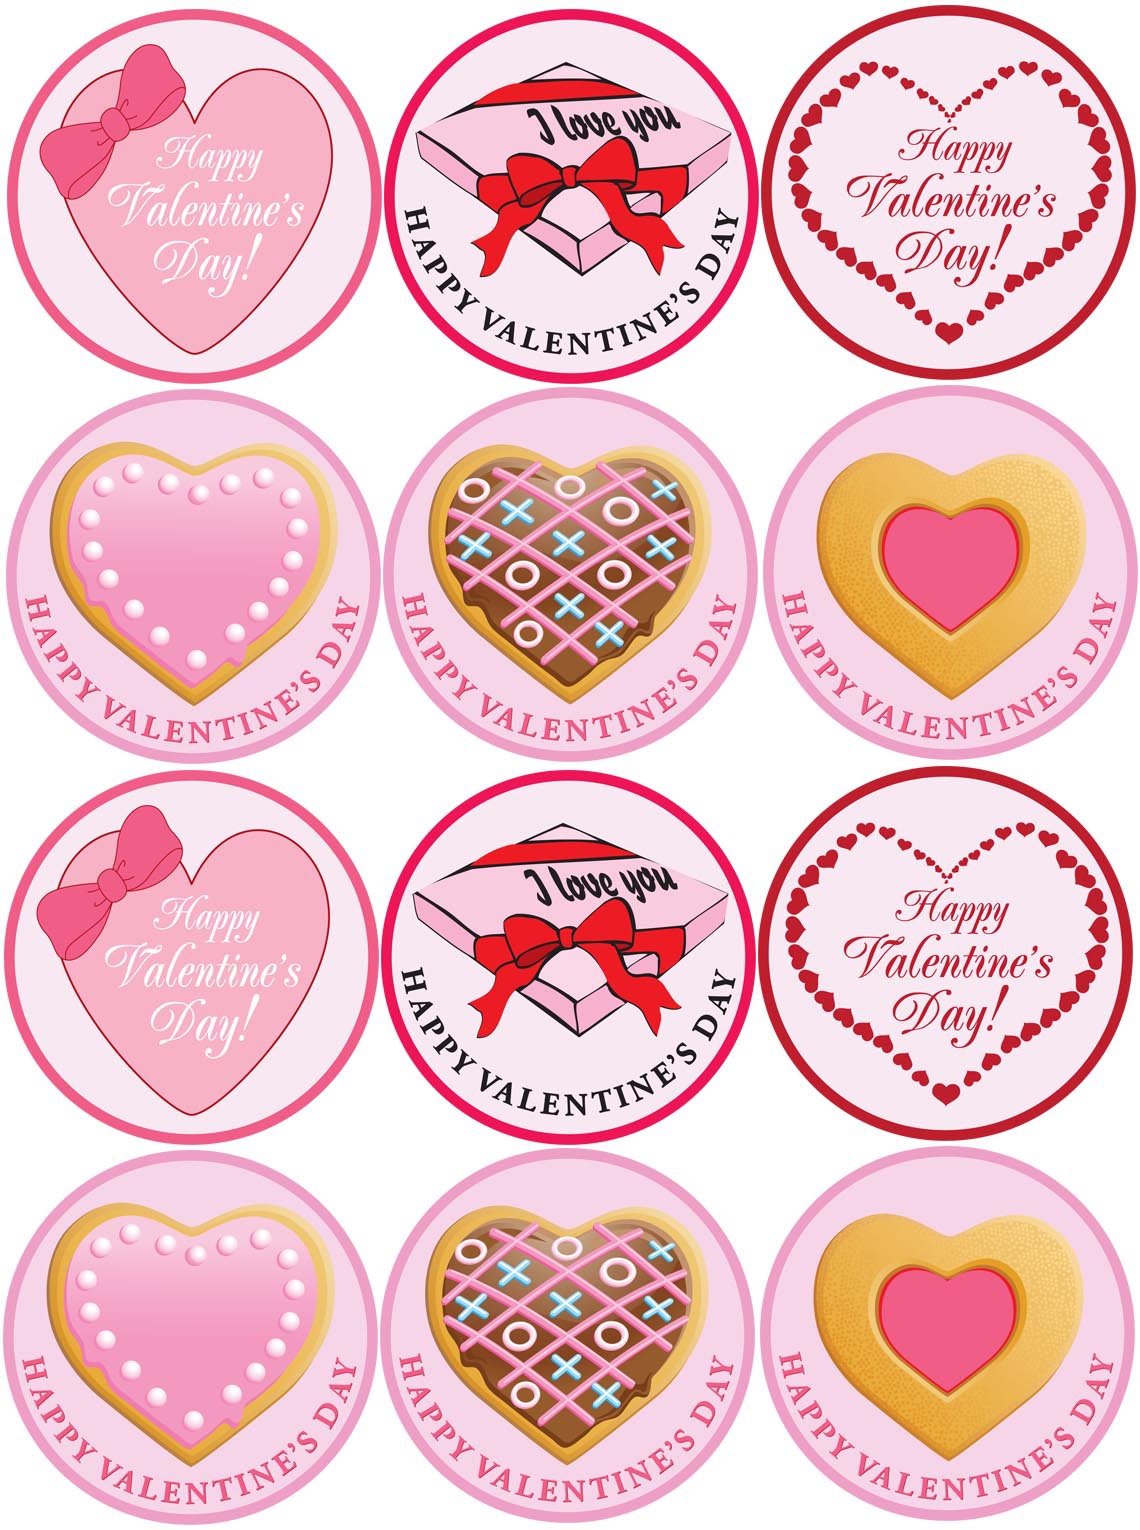 How To Decorate Your Valentine's Day Cupcakes With Clip Art